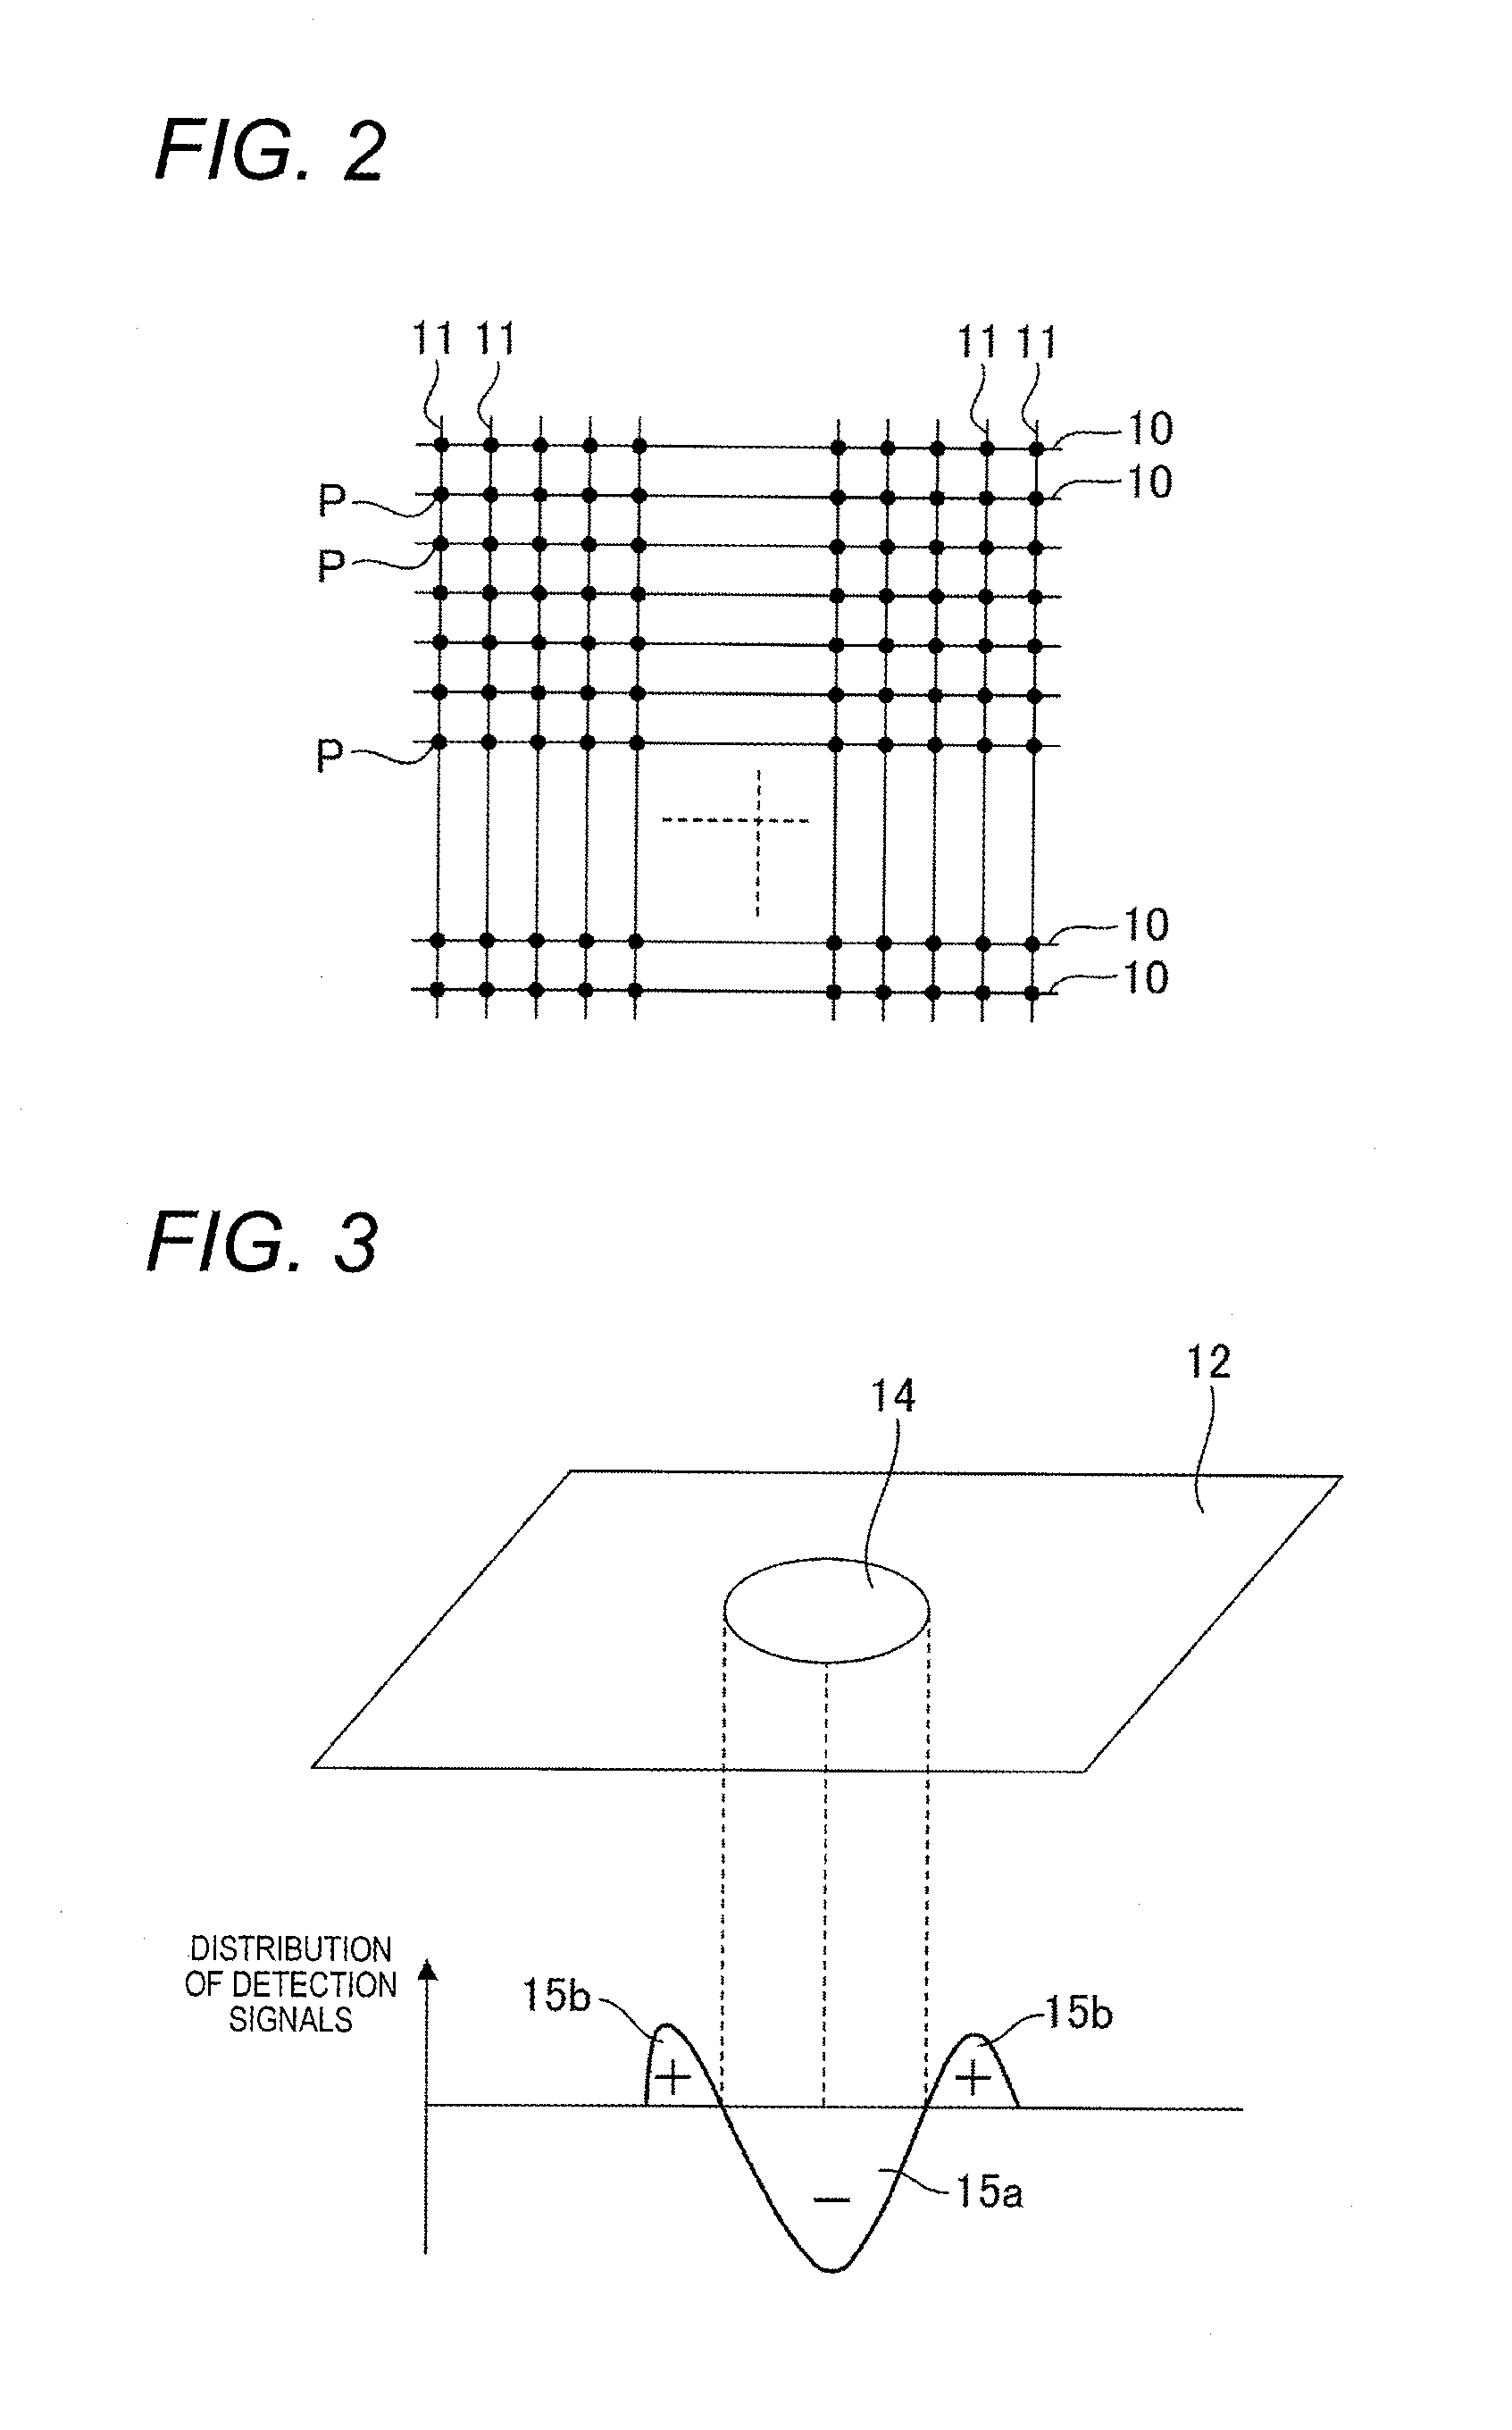 Touch panel device